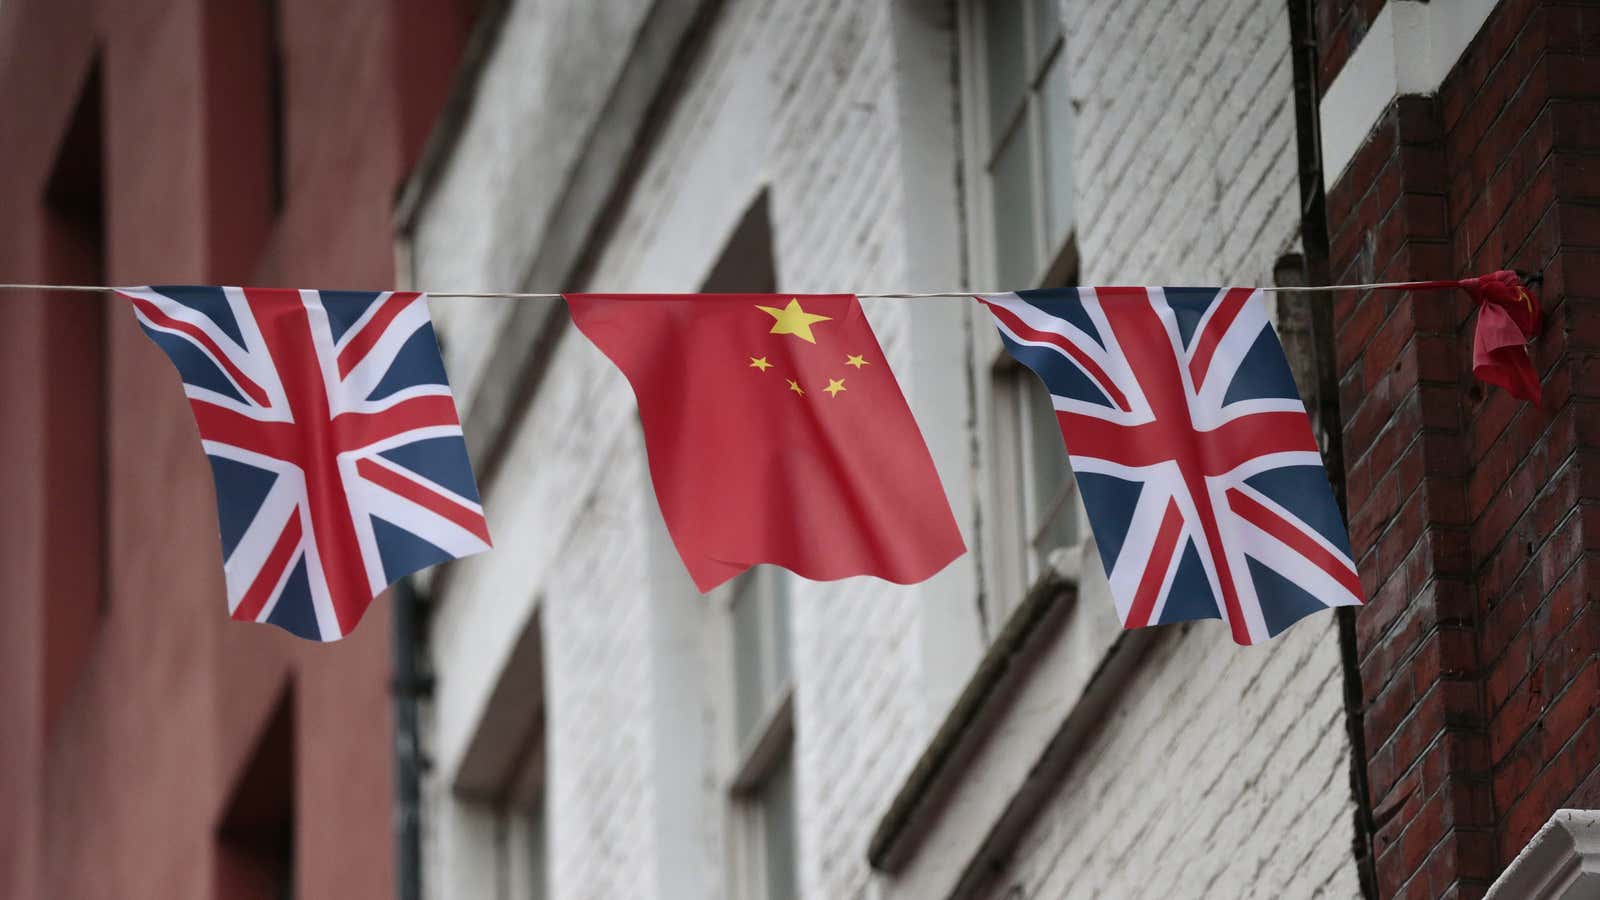 A lot has changed since Xi Jinping visited the UK in 2015, including Britain itself.